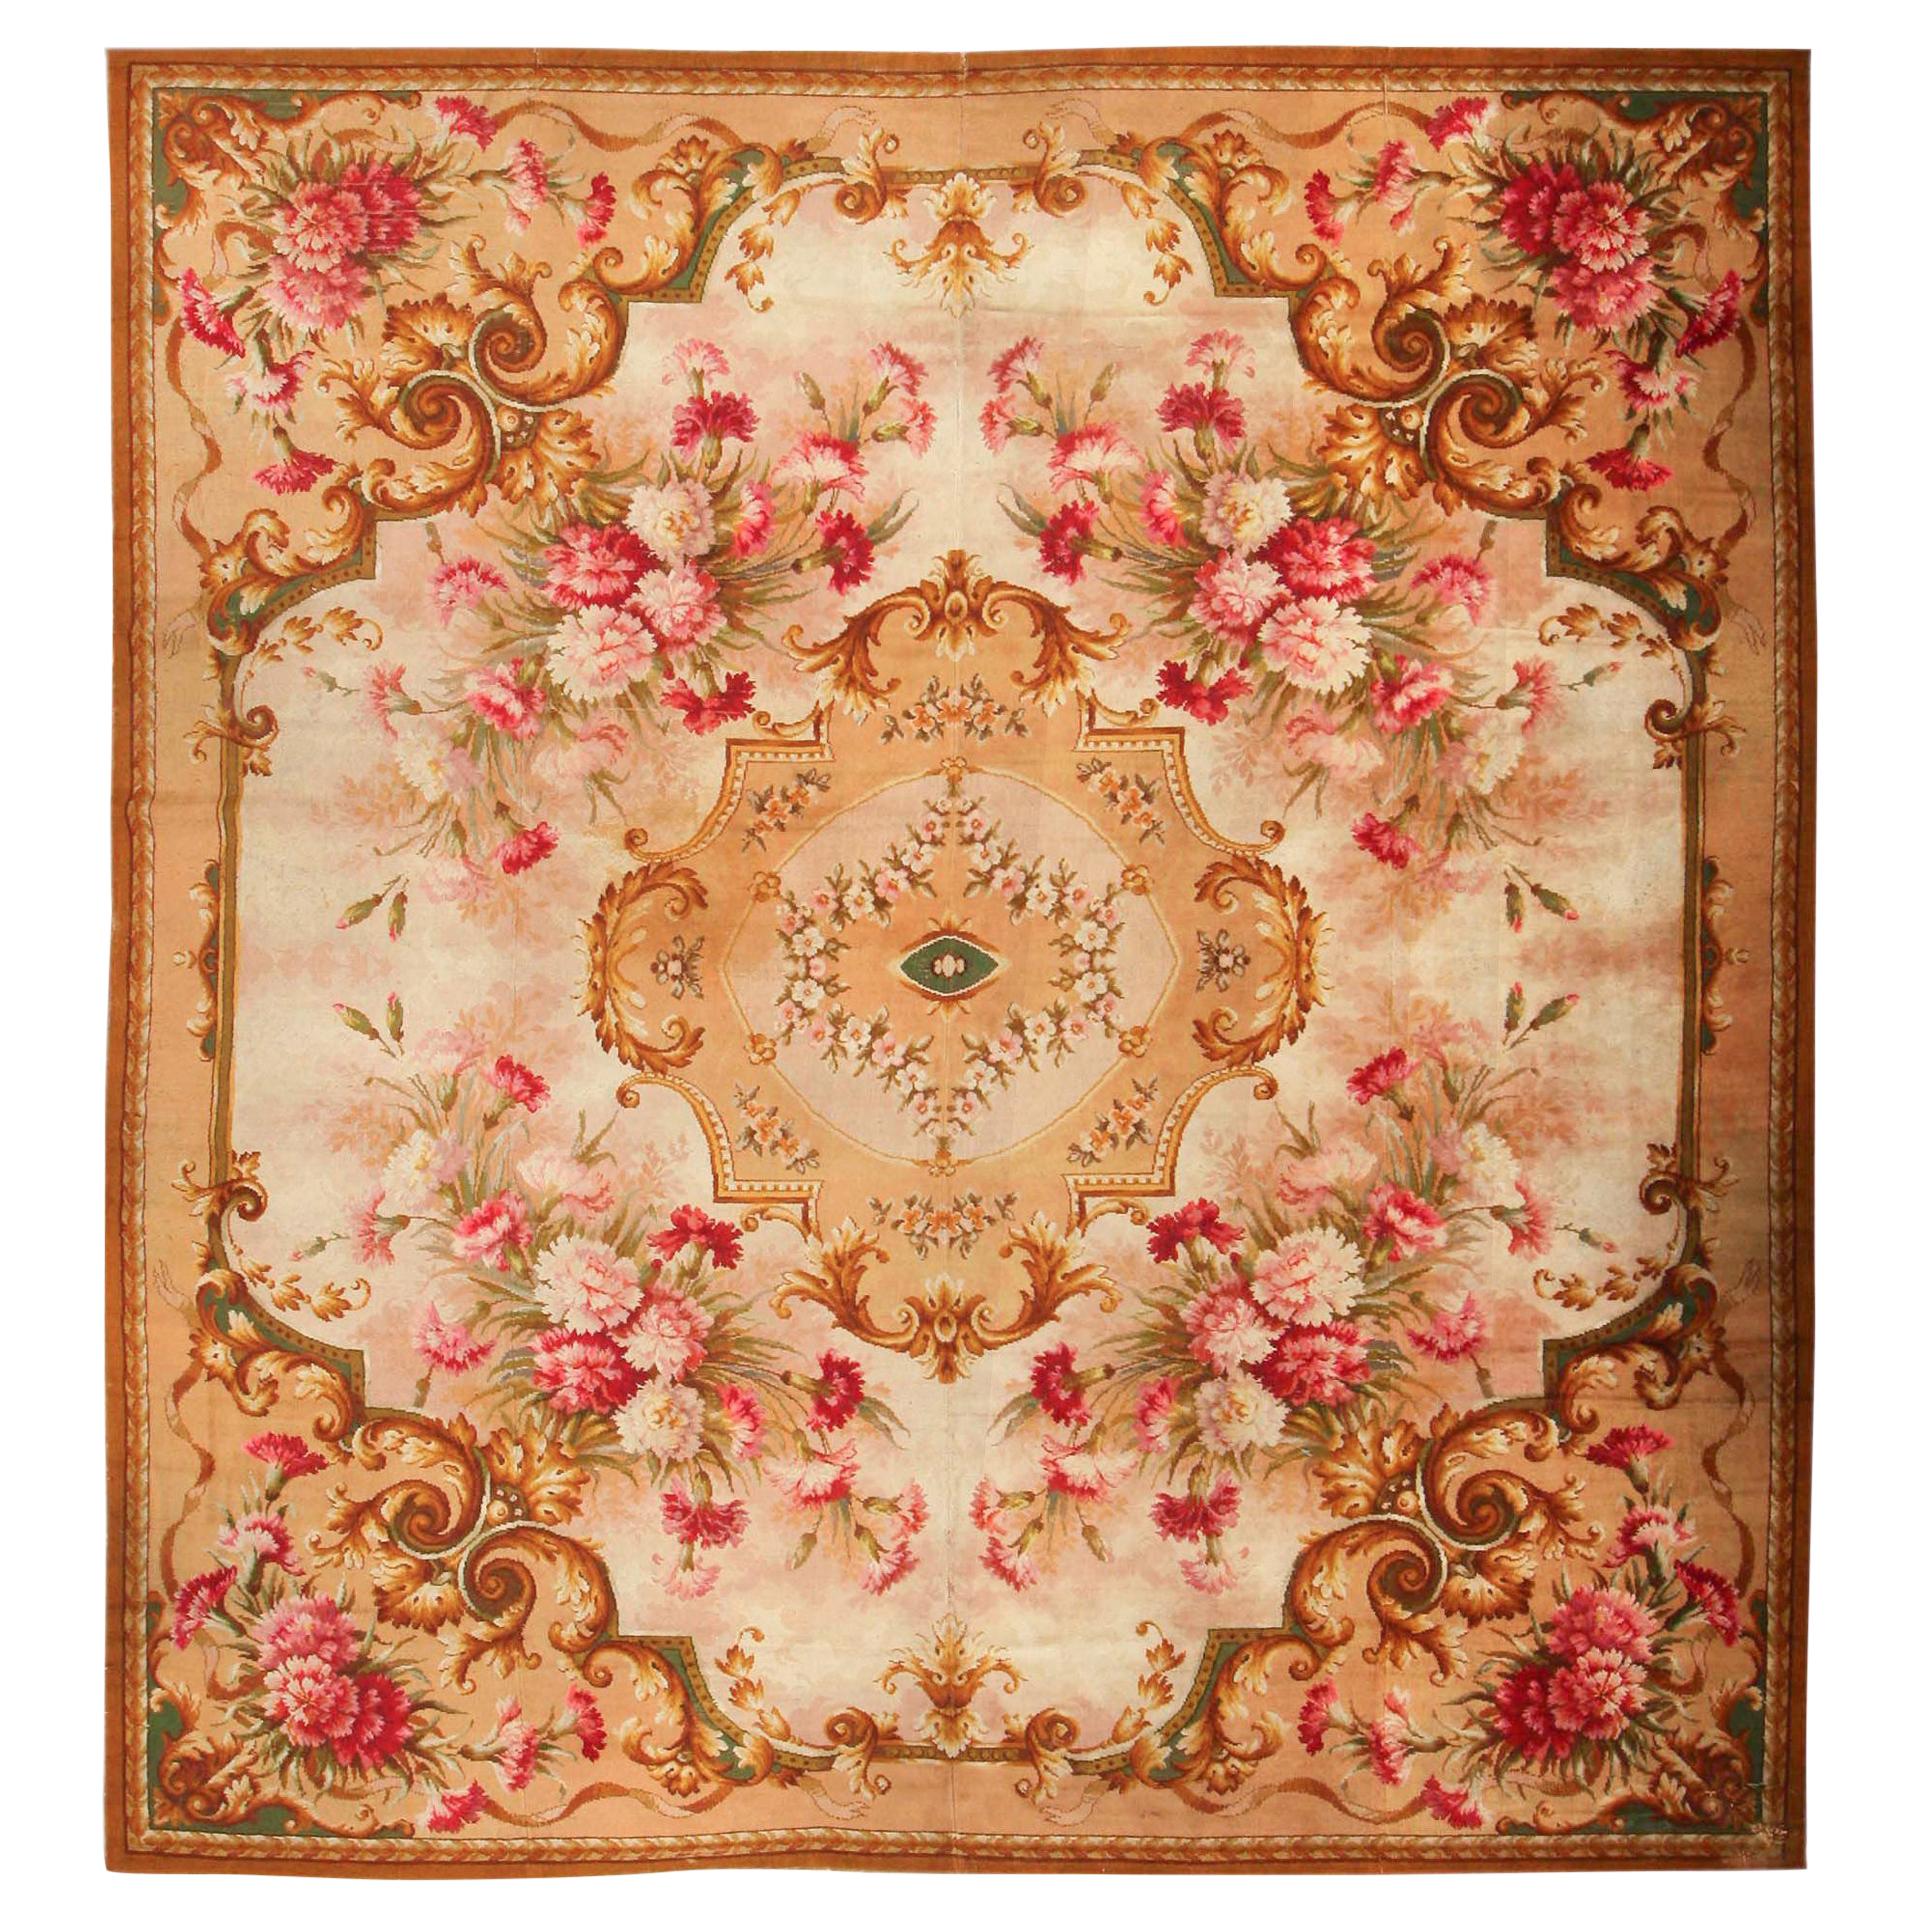 Antique English Axminster Rug. Size: 12 ft x 13 ft 3 in 